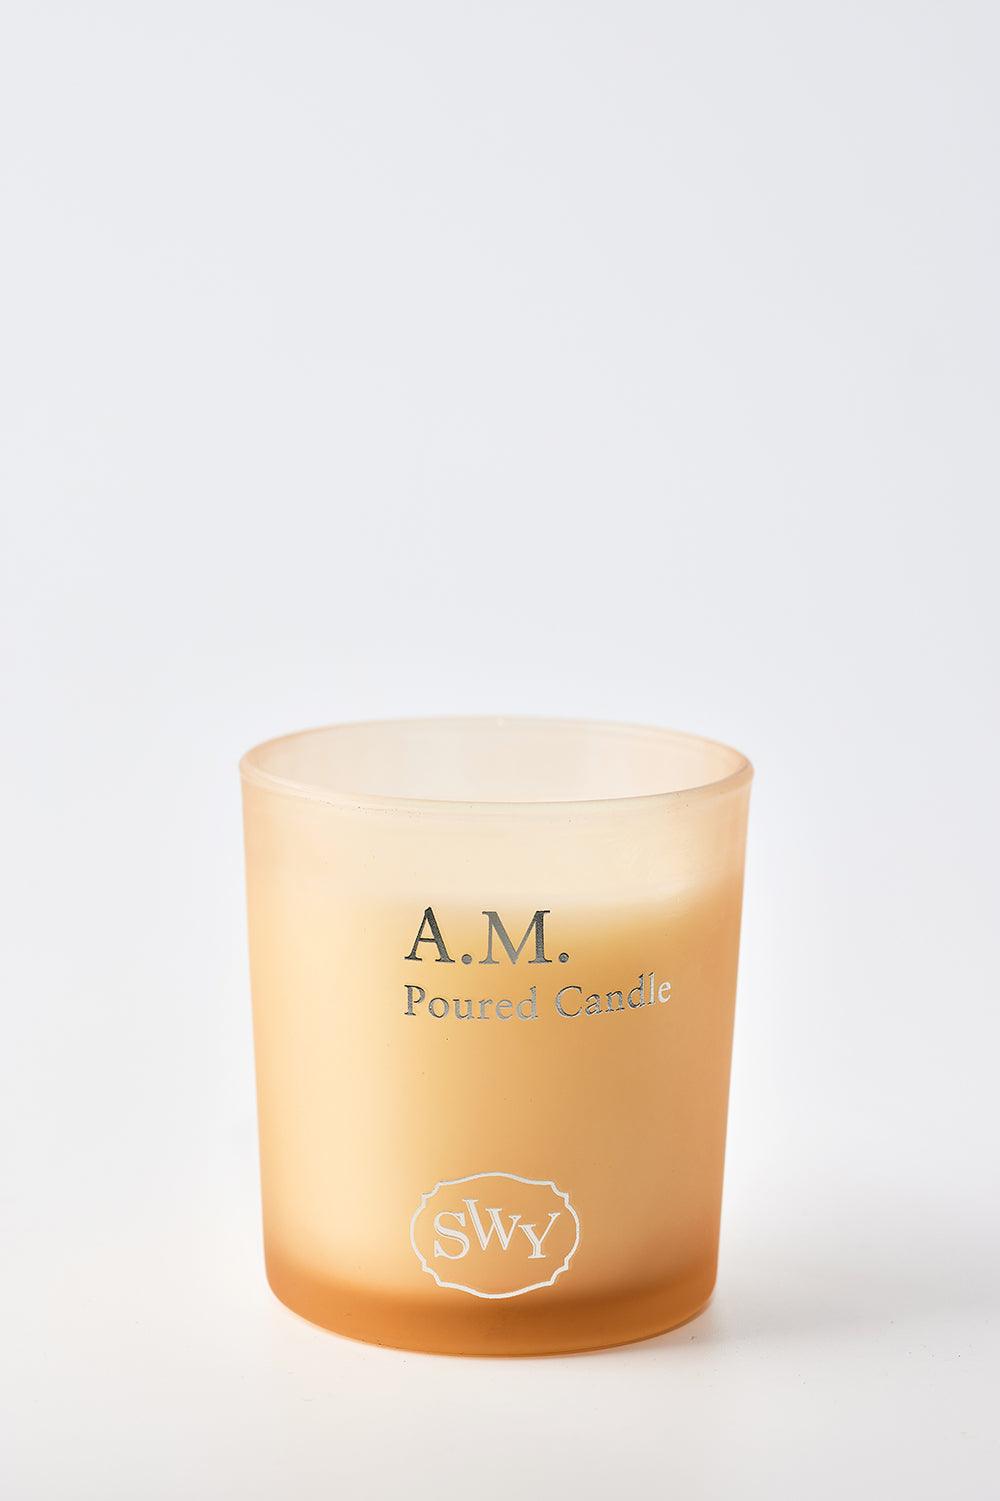 Poured Candle – A.M. - SWY - Scent With You